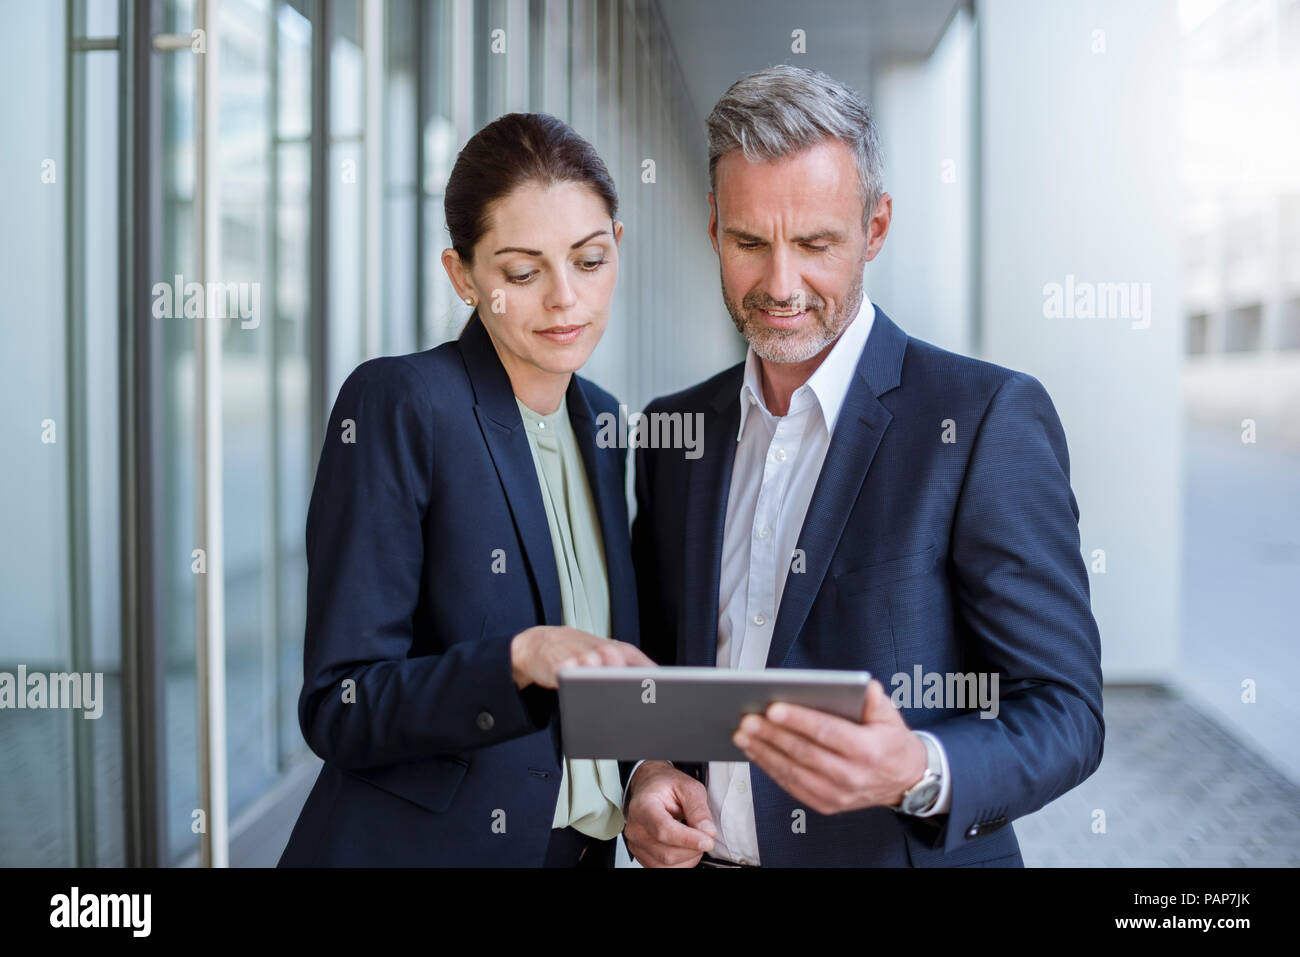 Portrait of two business partners looking together at tablet Stock Photo